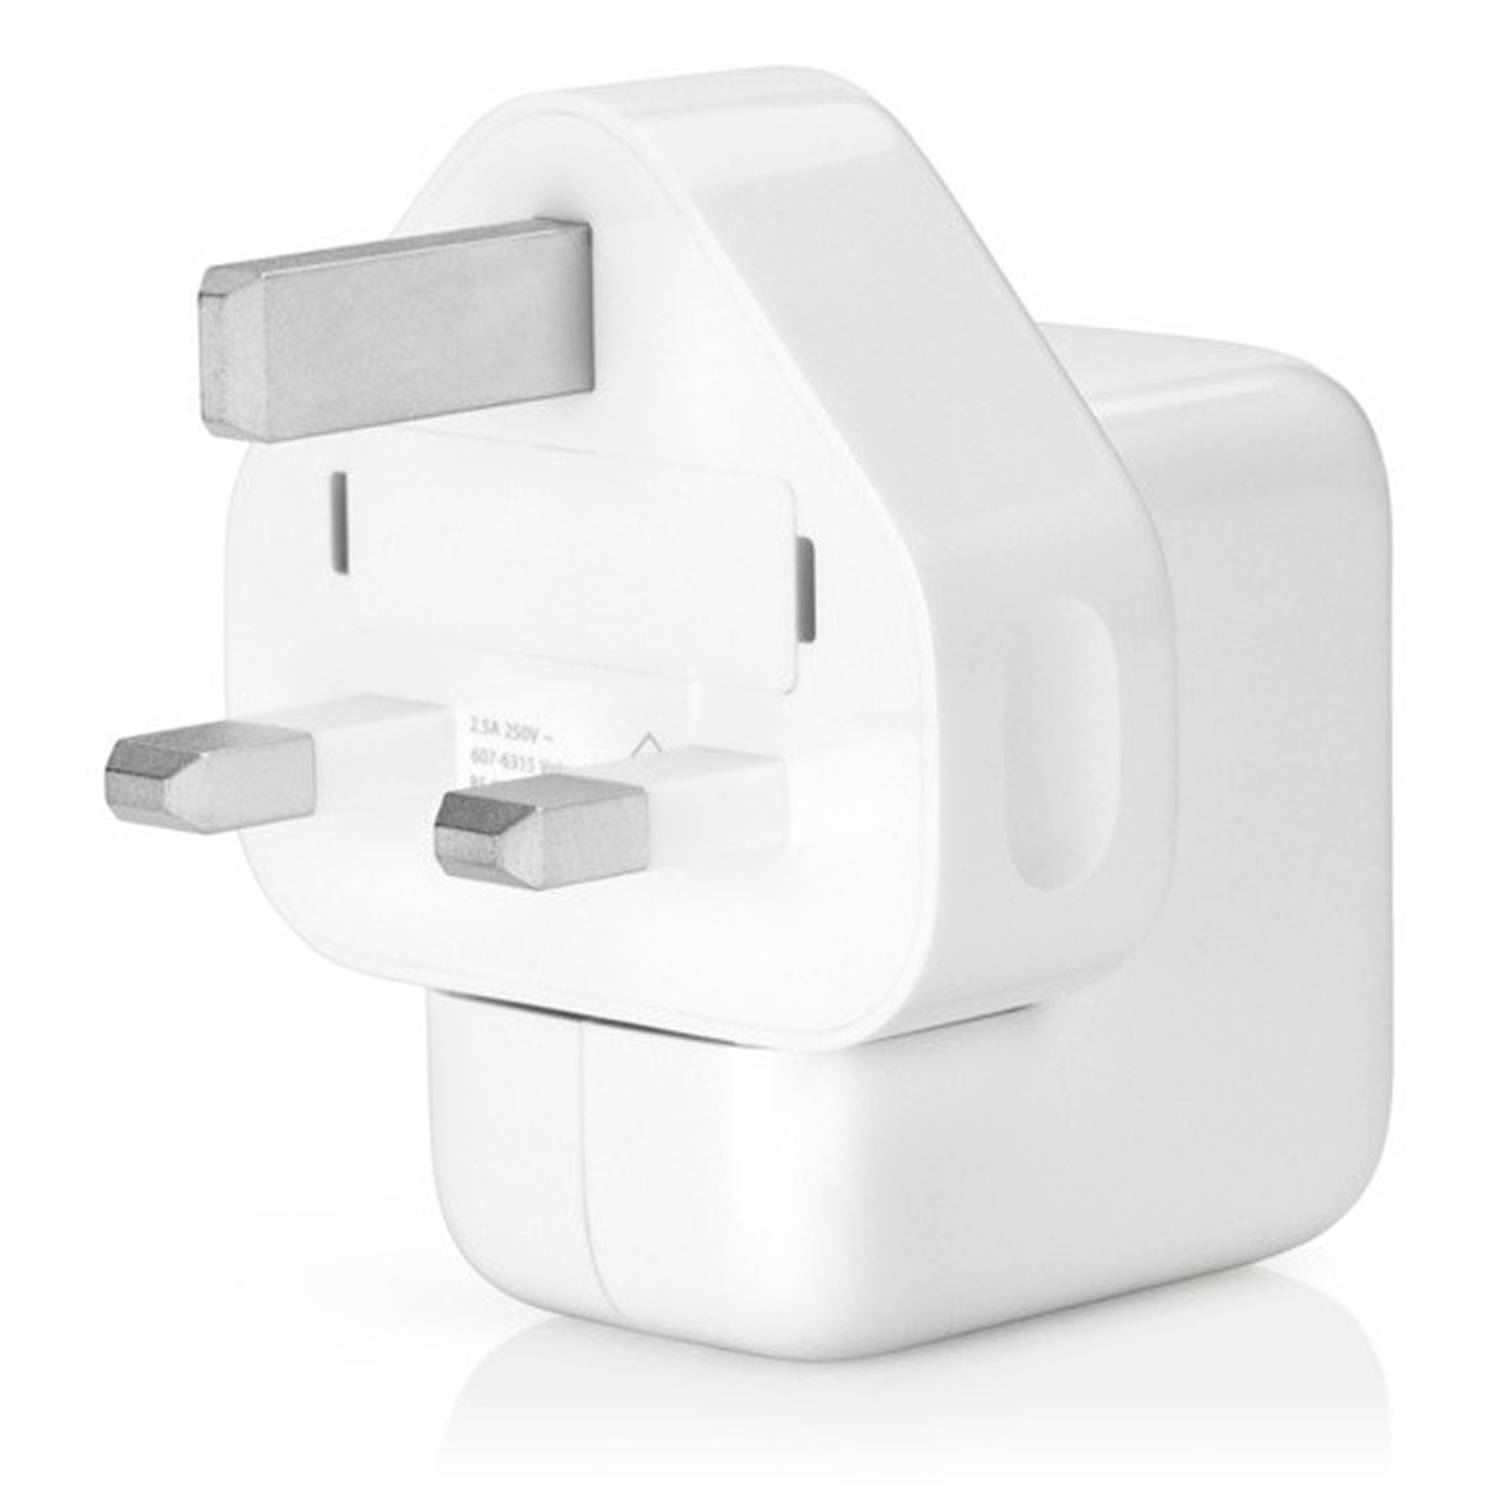 iPad Apple Power for 12W 3-Pin Adapter & iPhone, Watch Apple